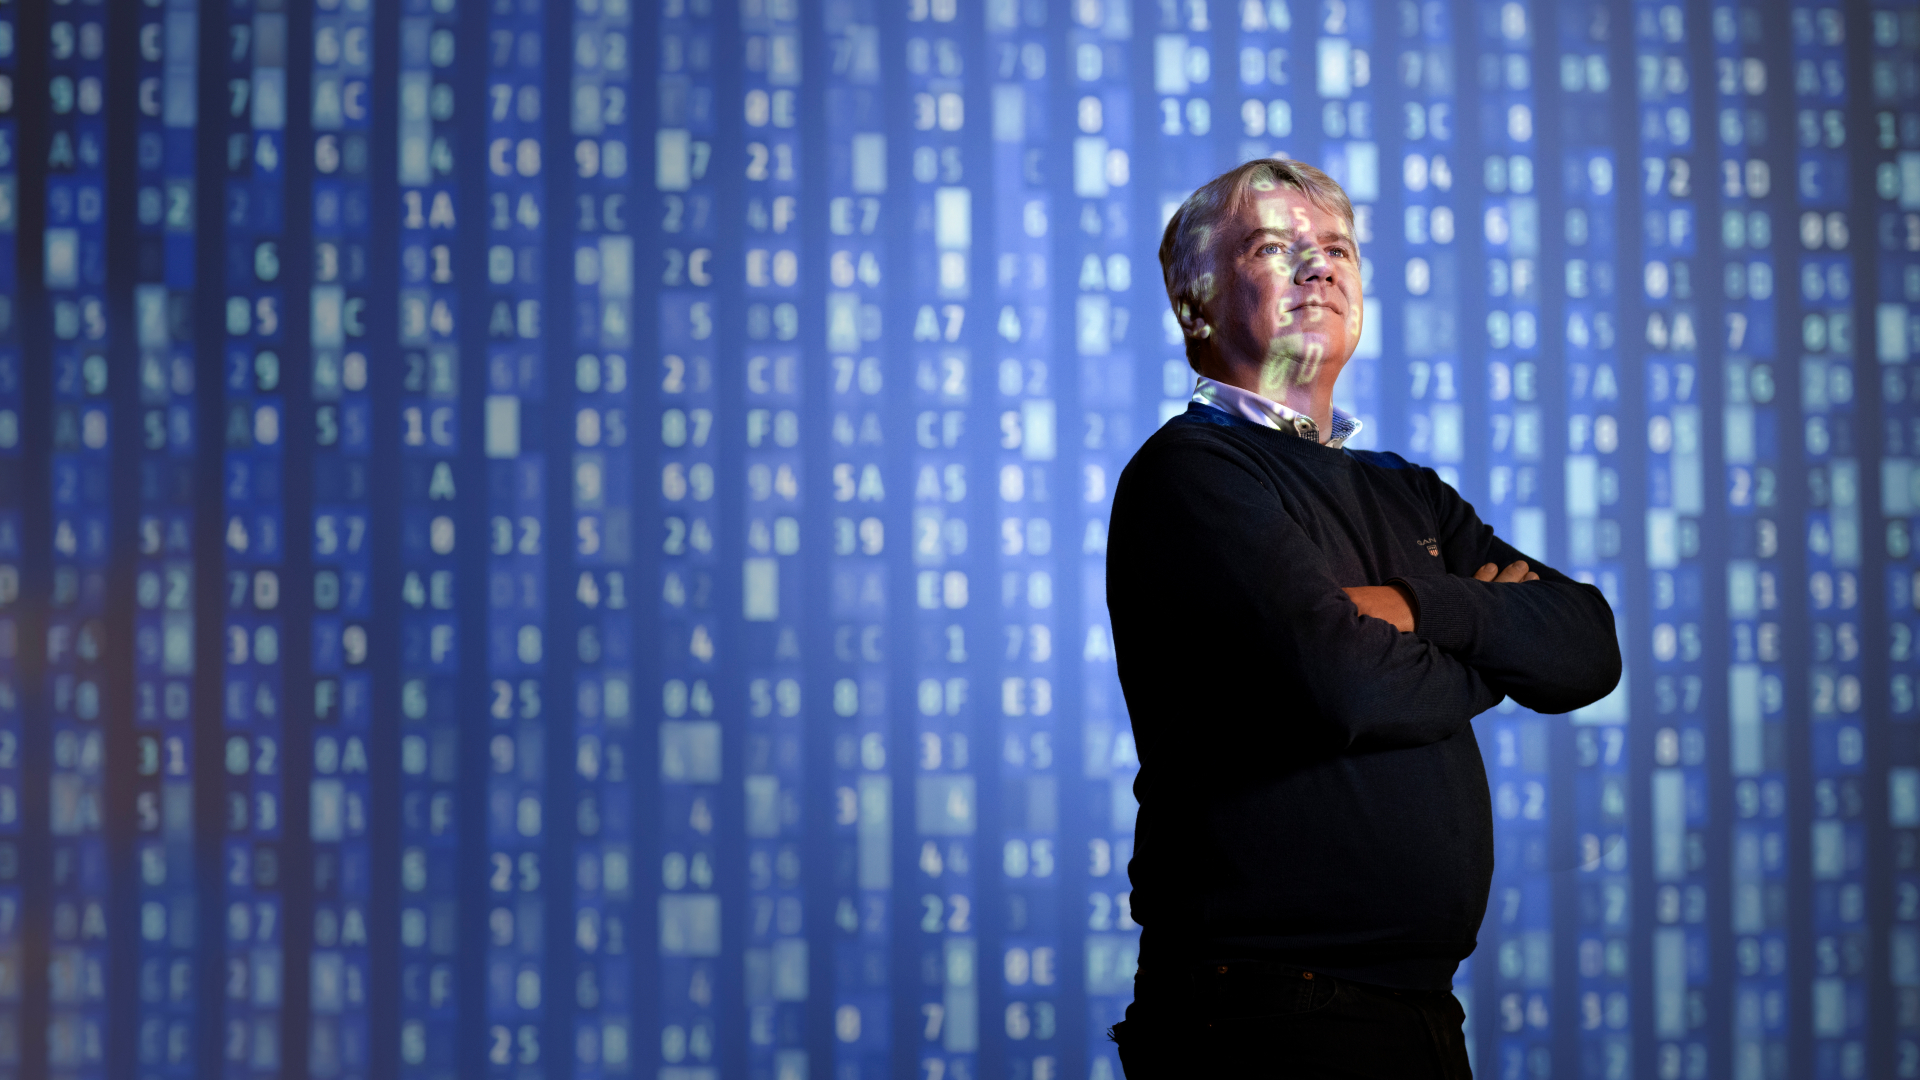 As a student assistant at the University of Copenhagen in 1990, Christian D. Jensen witnessed firsthand one of the very first hacker attacks in Danish history. Photo: Thomas Steen Sørensen